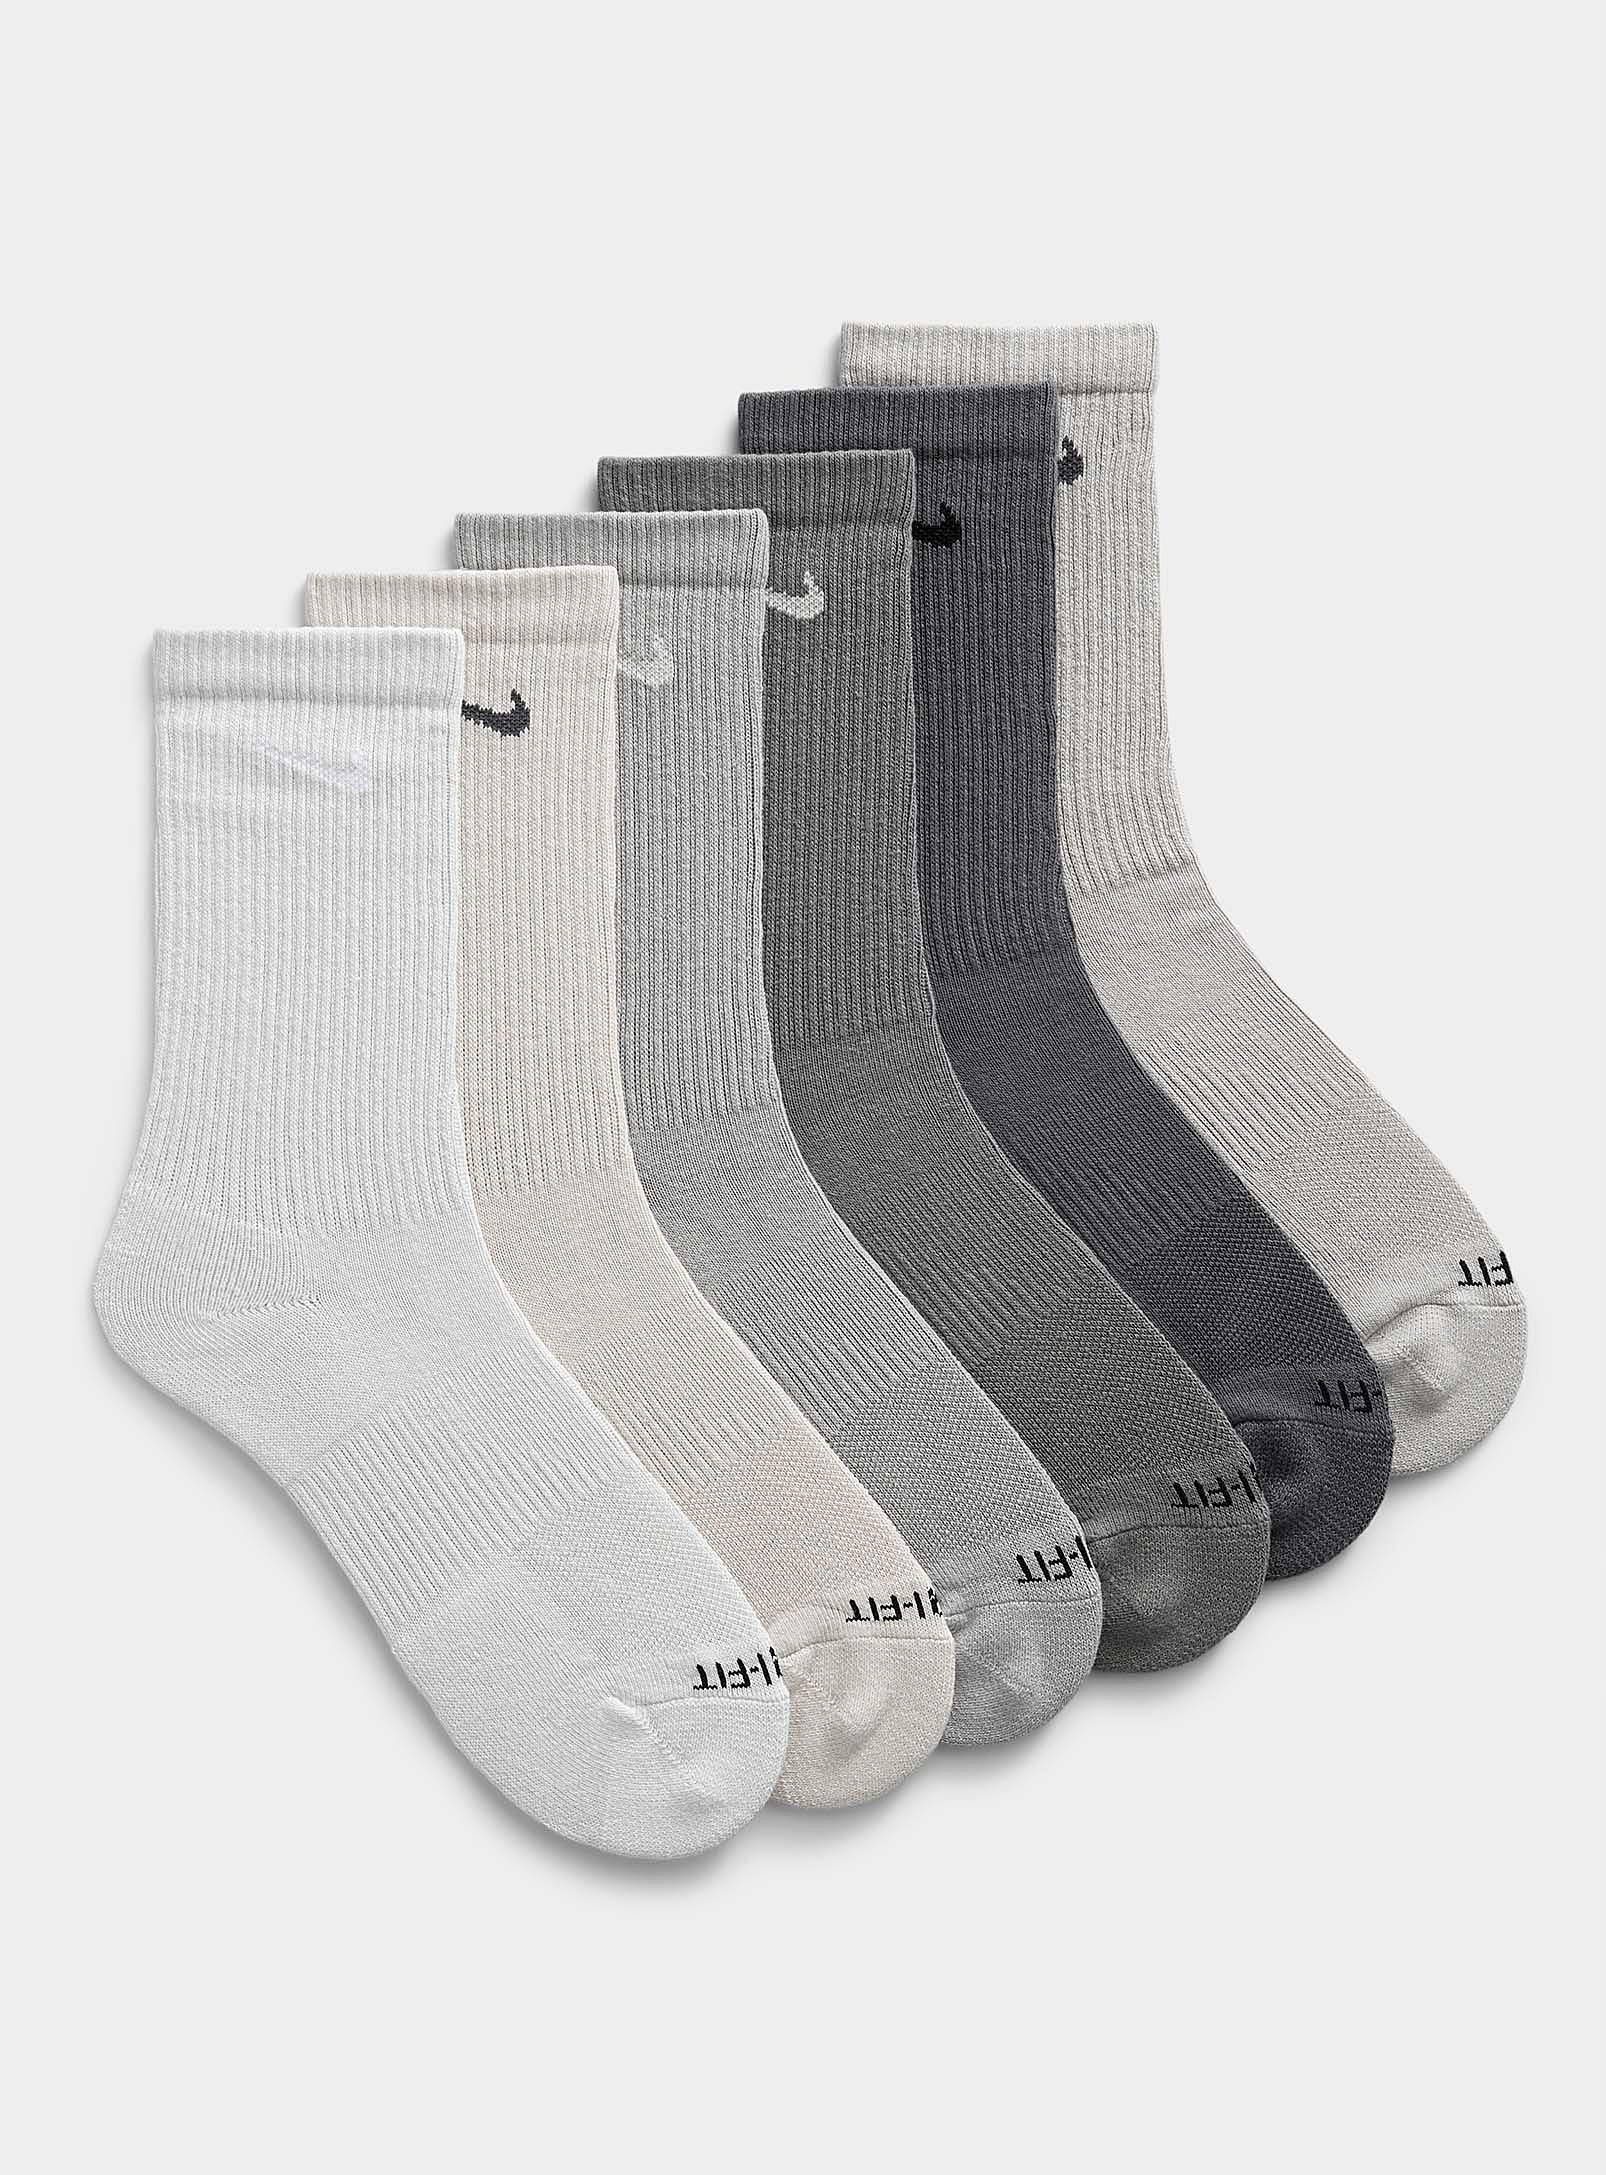 Nike Everyday Plus Colourful Socks 6-pack In Patterned Black